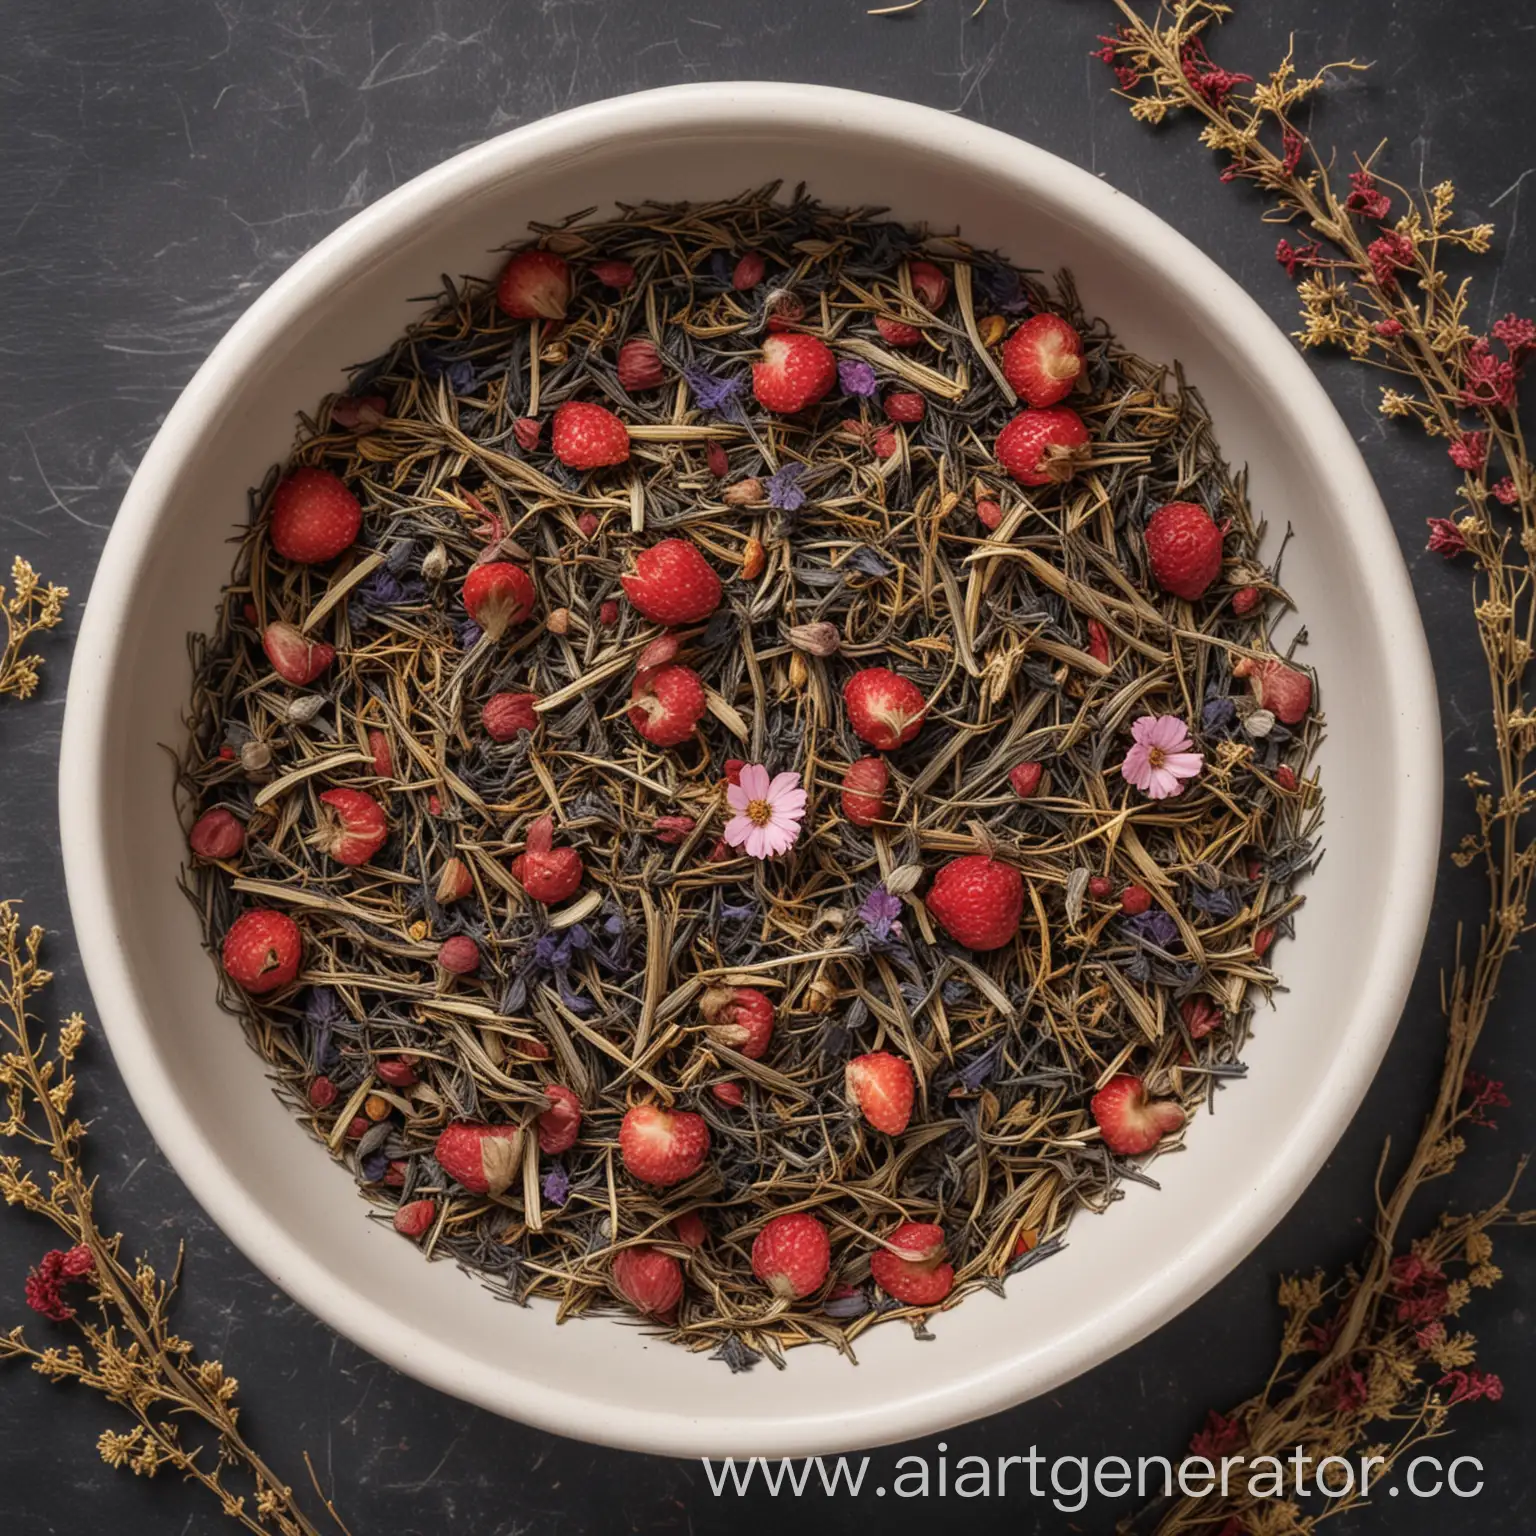 Earl Grey loose tea "Strawberry needles" in a bowl, top view, and dried flowers on the sides